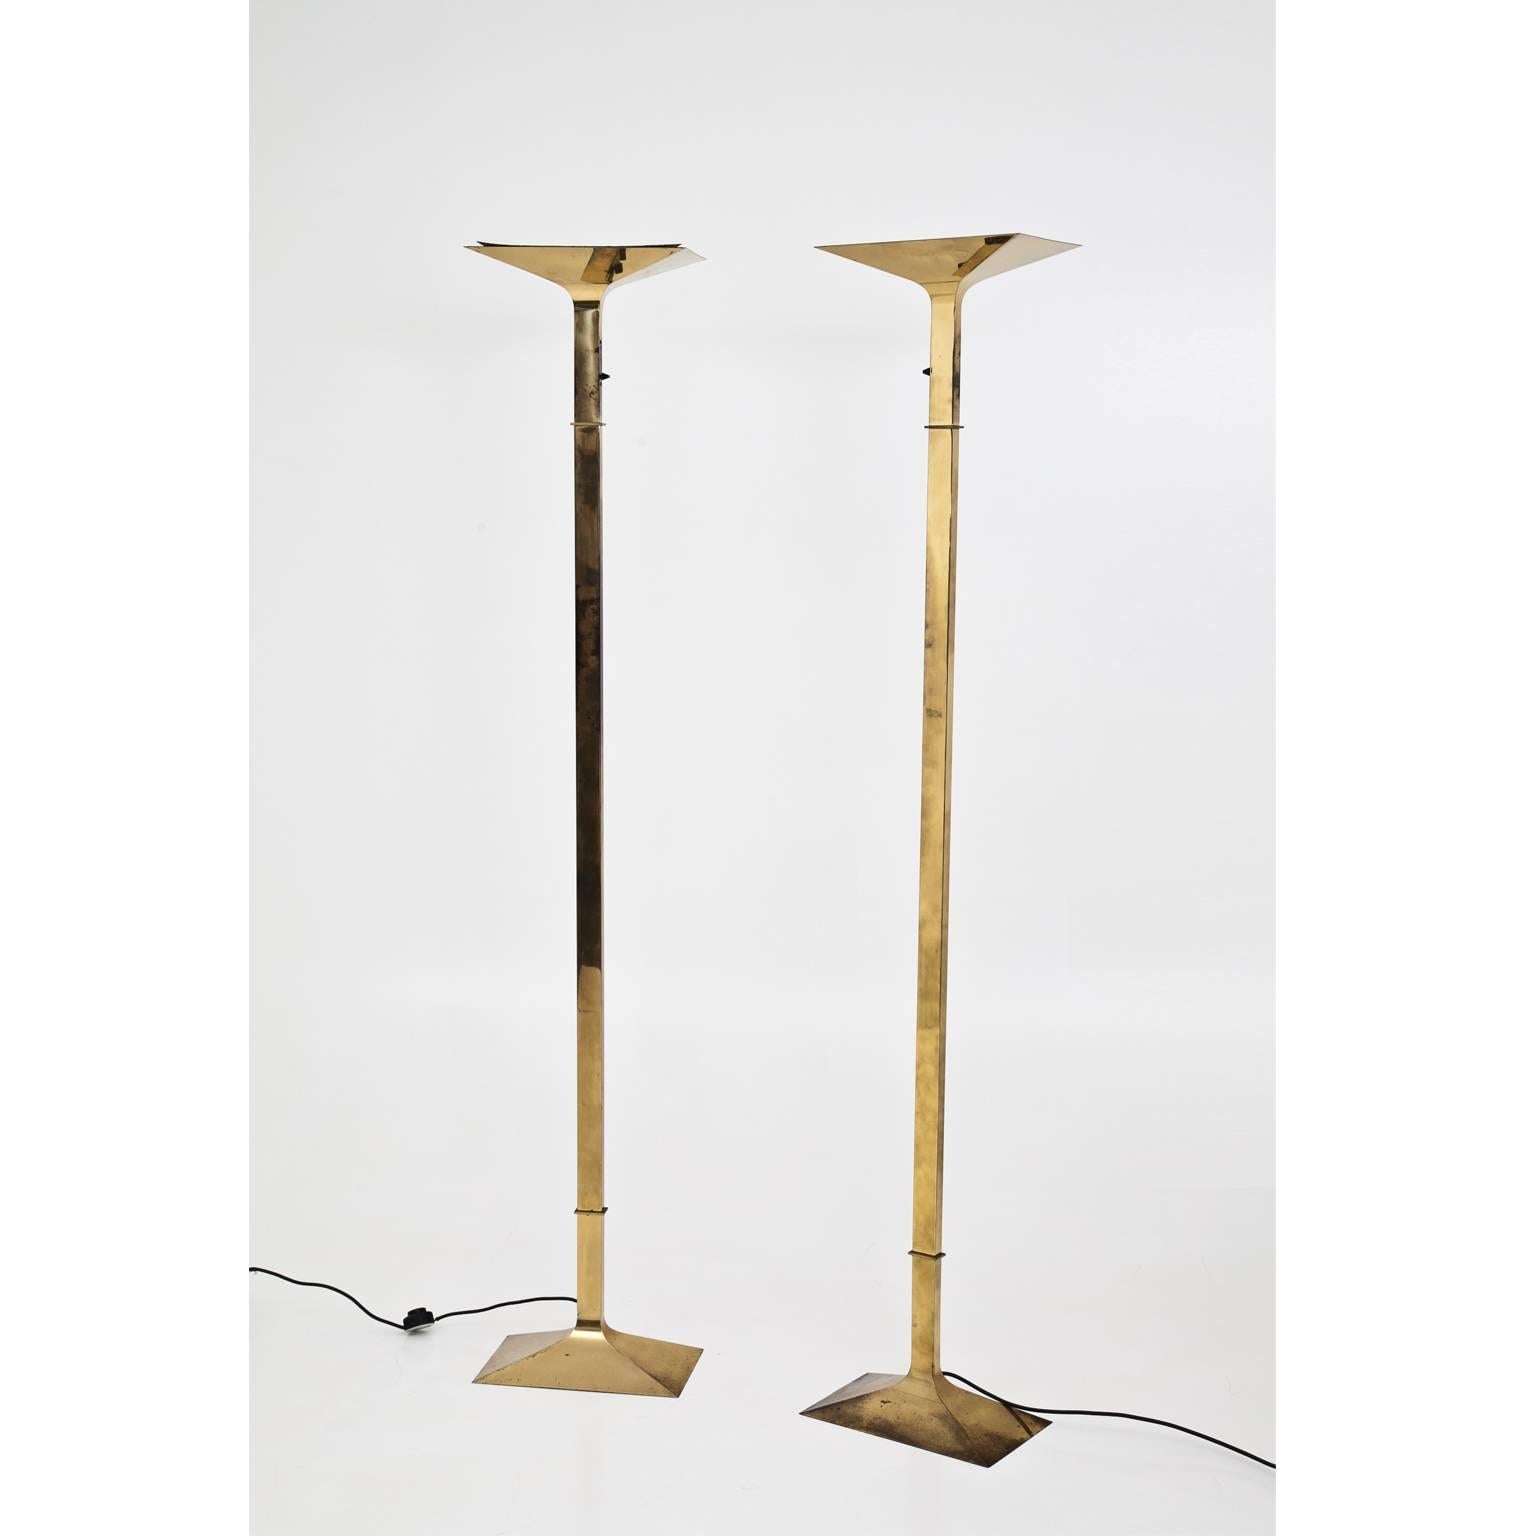 Pair of tall Italian floor lamps out brass with a rectangular Stand and smooth shaft. The brass is slightly tarnished.